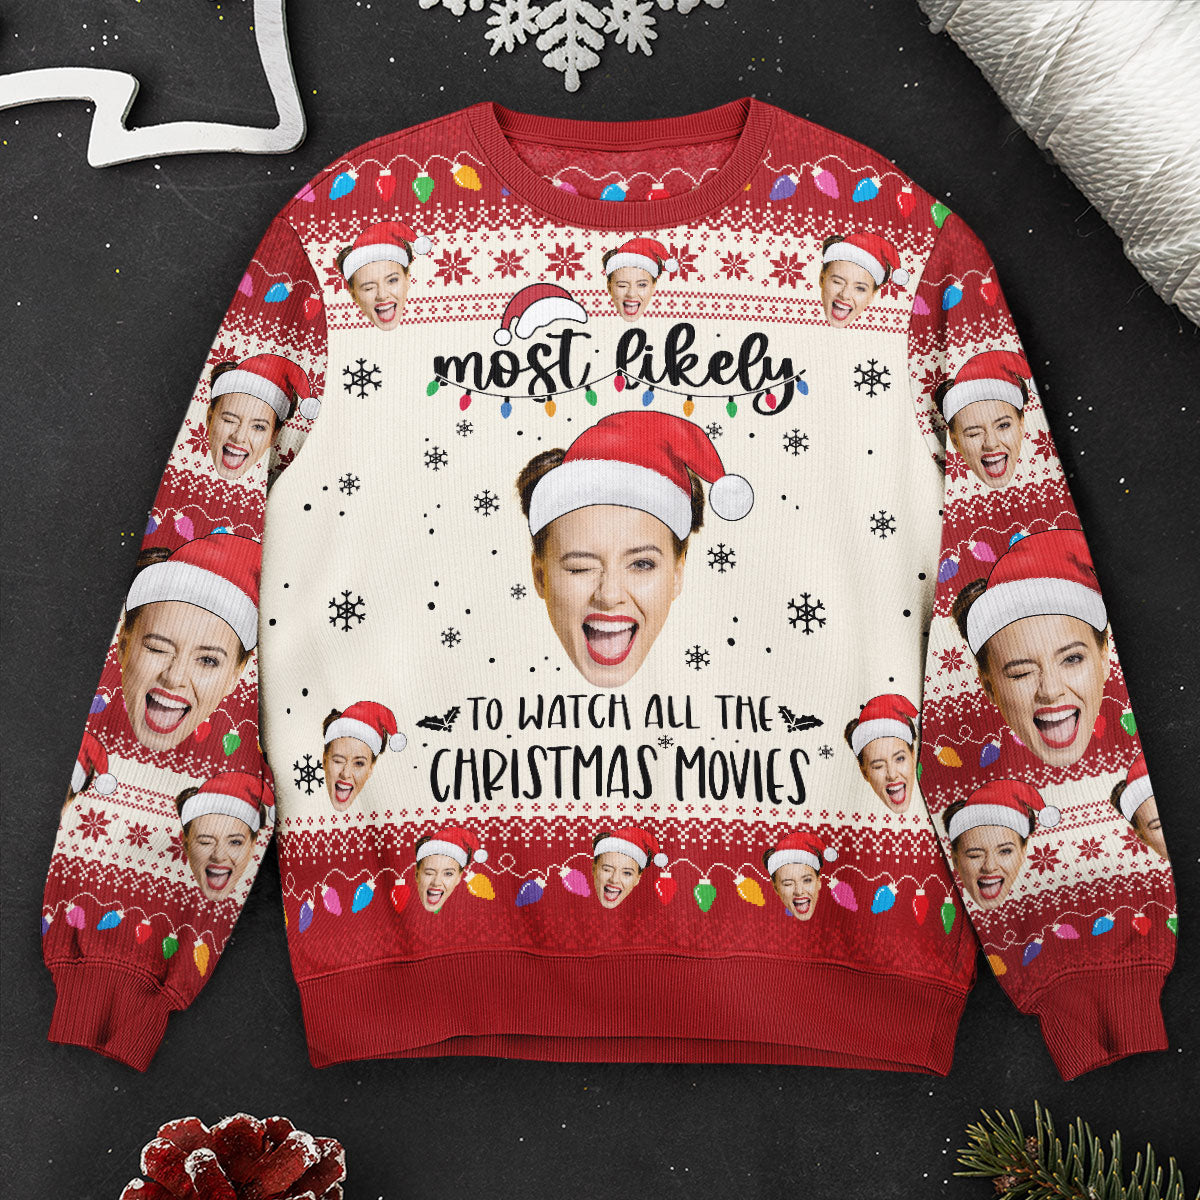 Custom Face Most Likely To Christmas - Personalized Photo Ugly Sweater